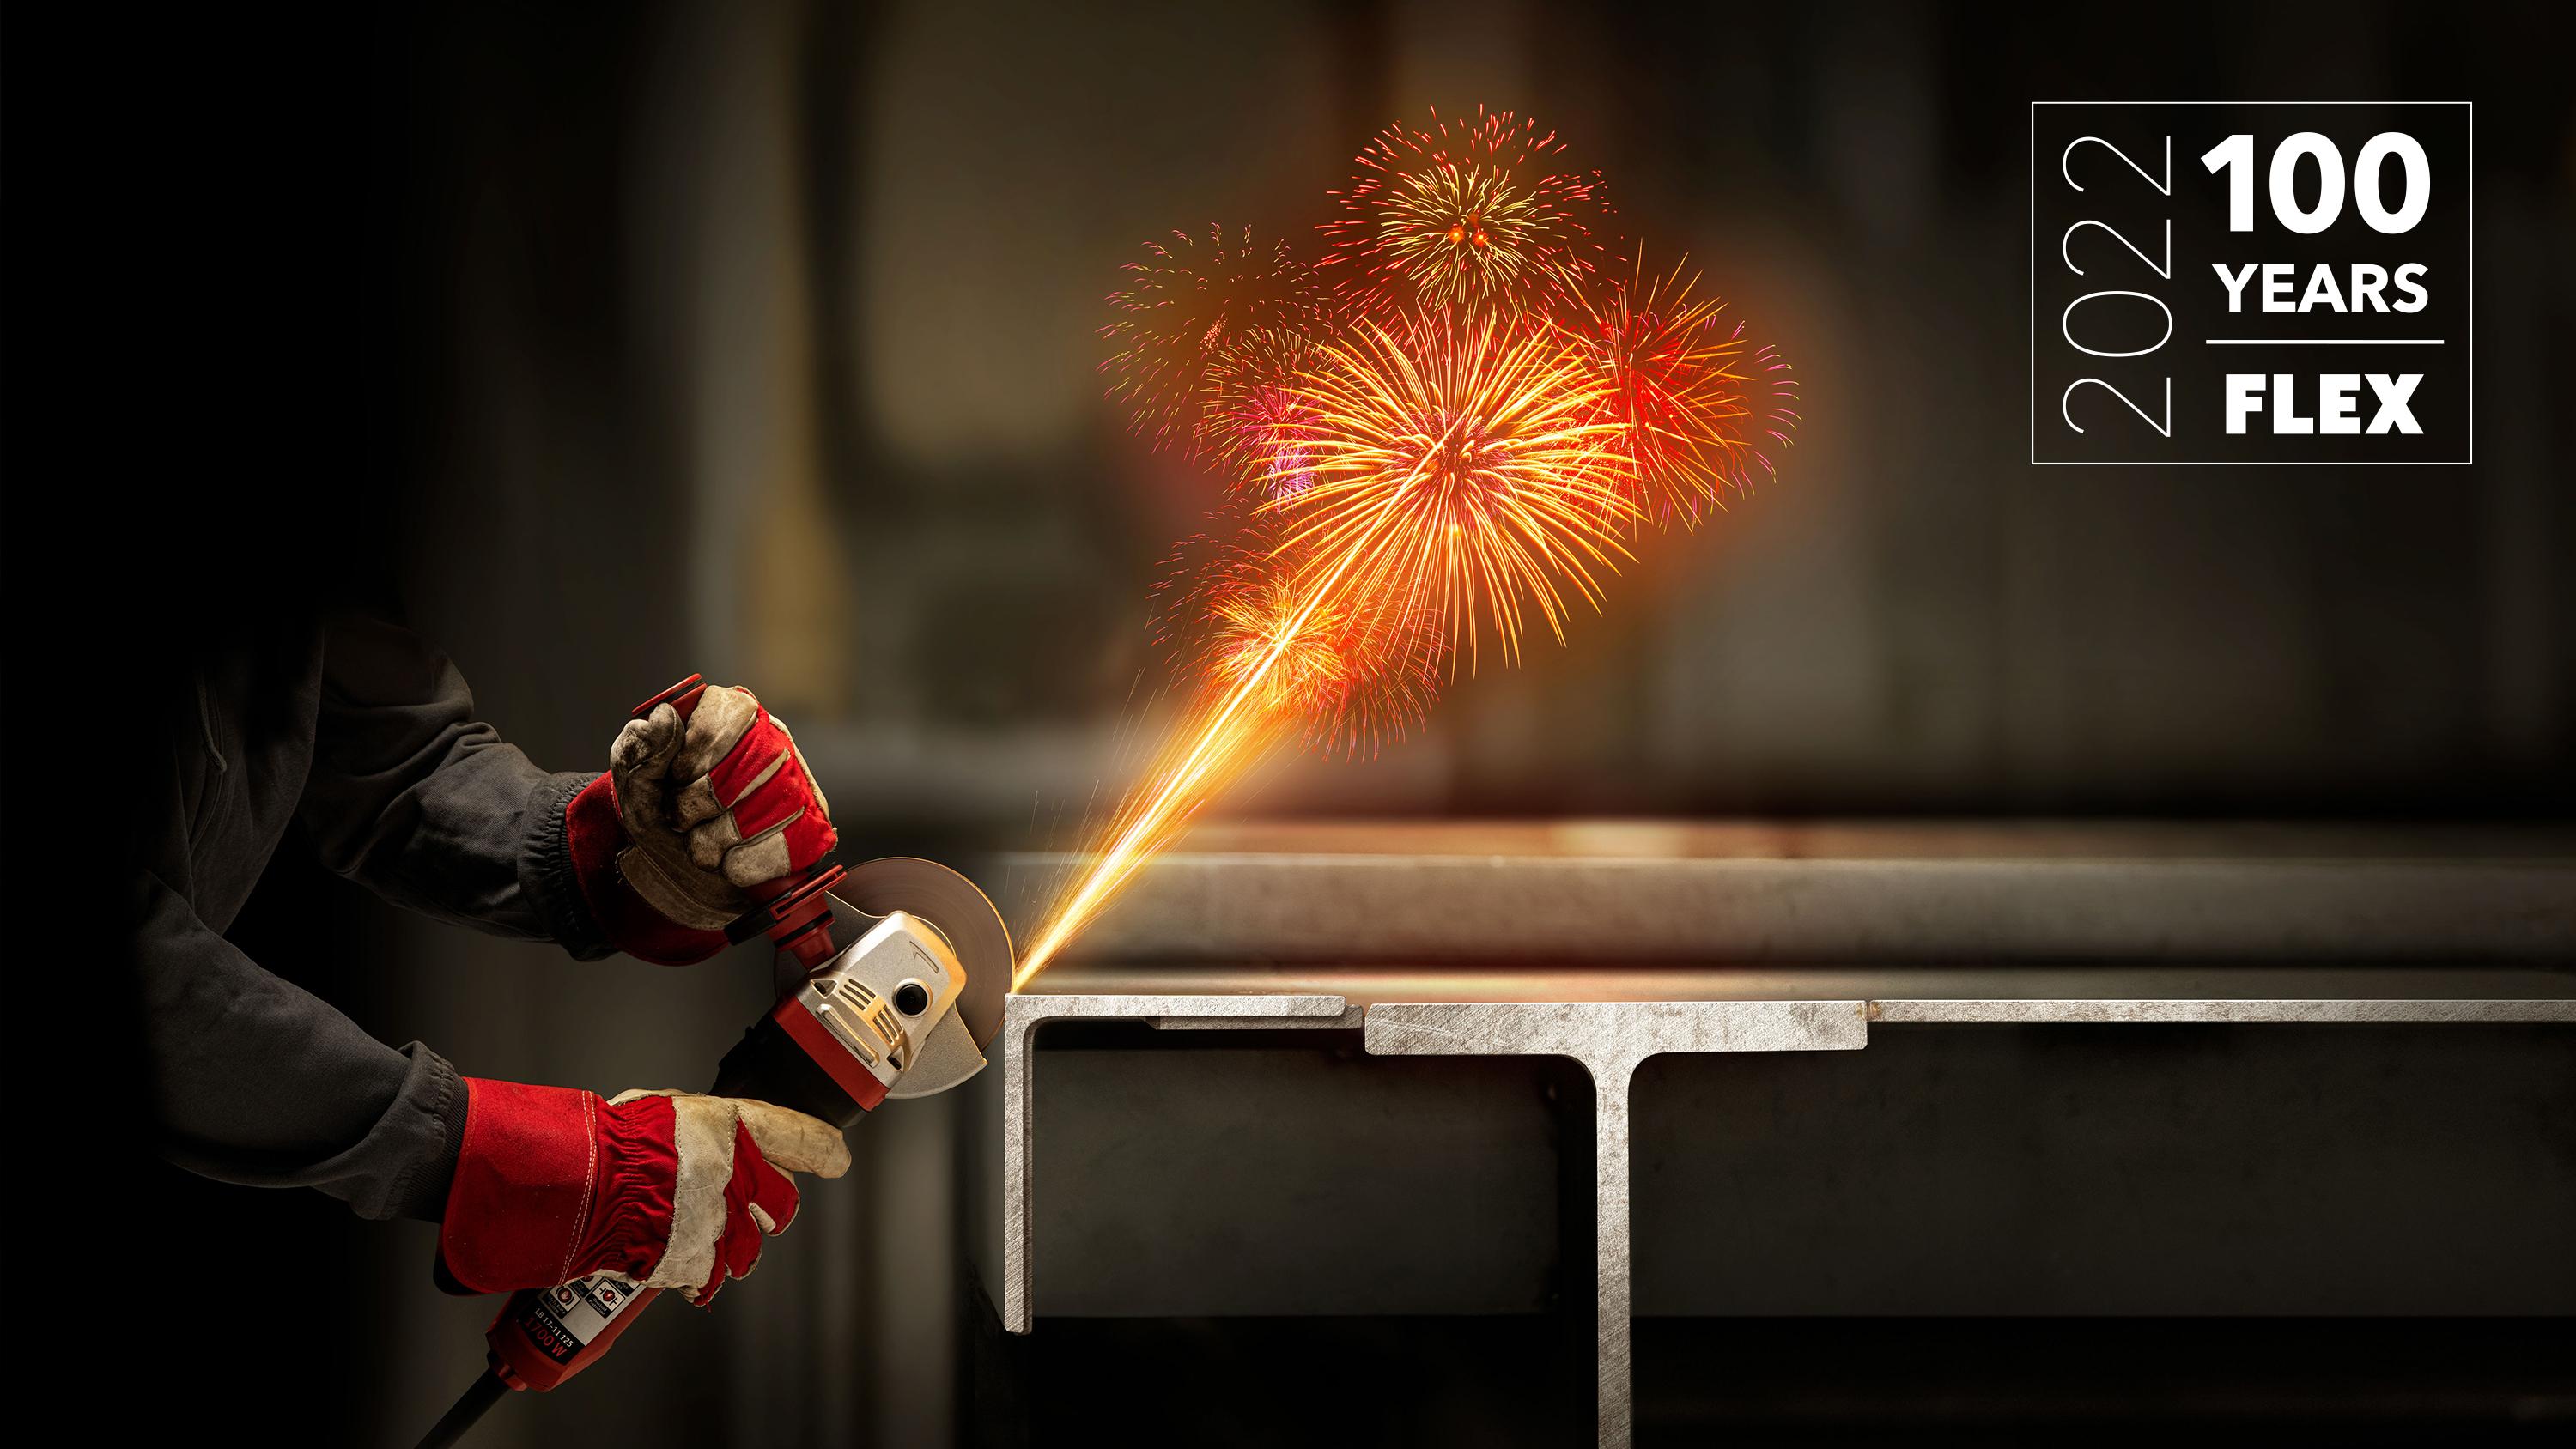 100 years of FLEX Cutting metal with an angle grinder, sparks flying